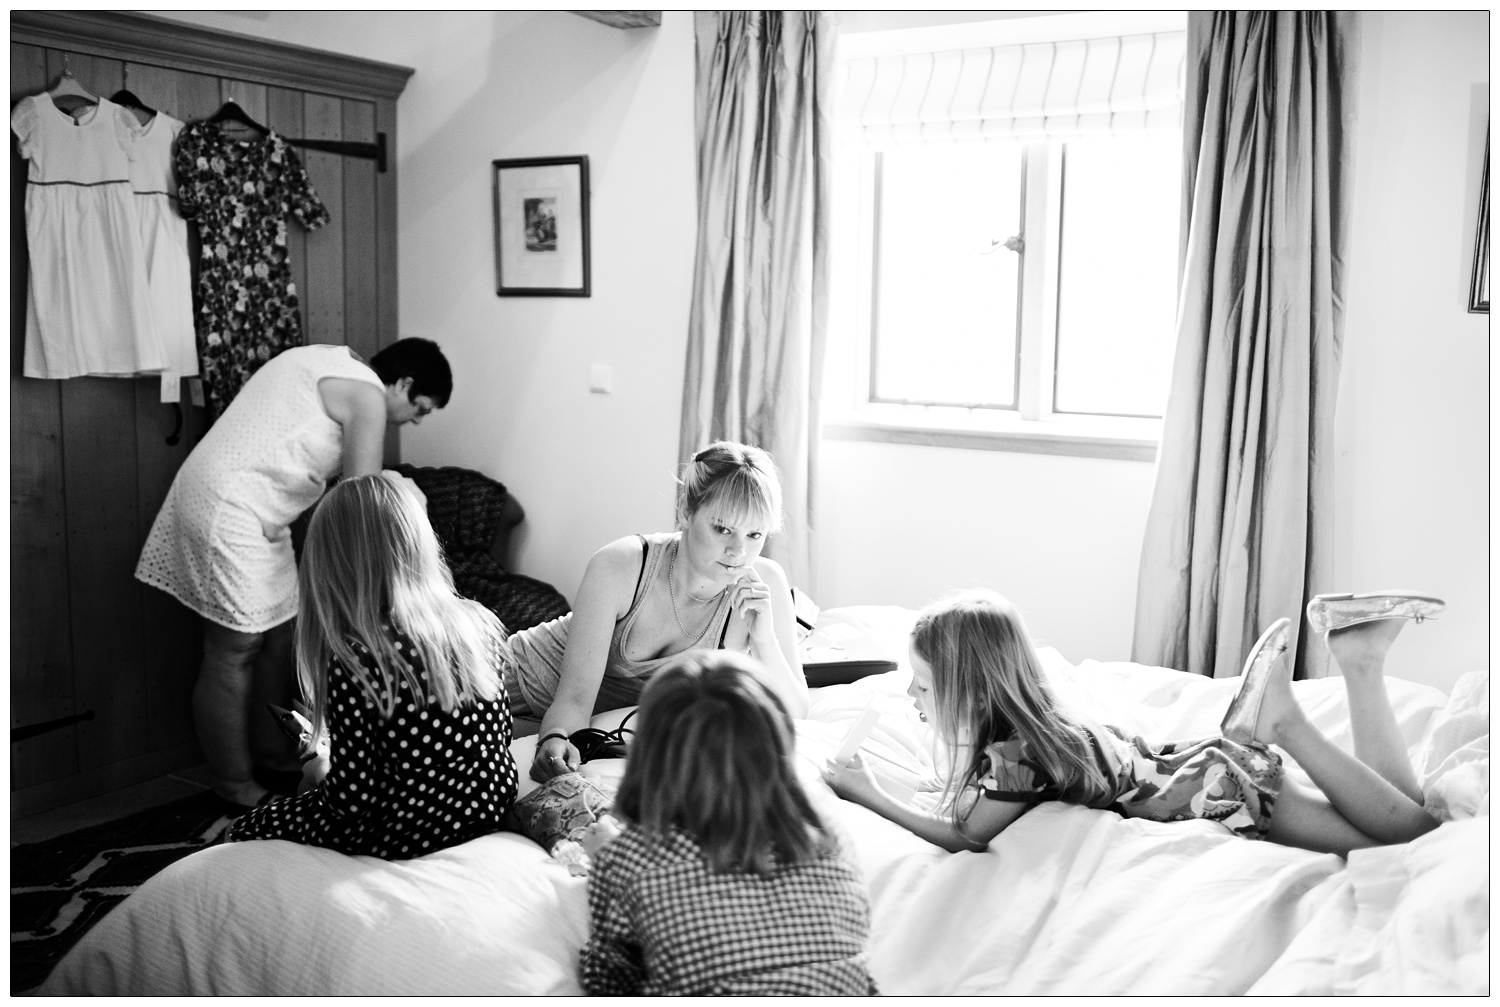 Women and girls in a bedroom before a wedding.